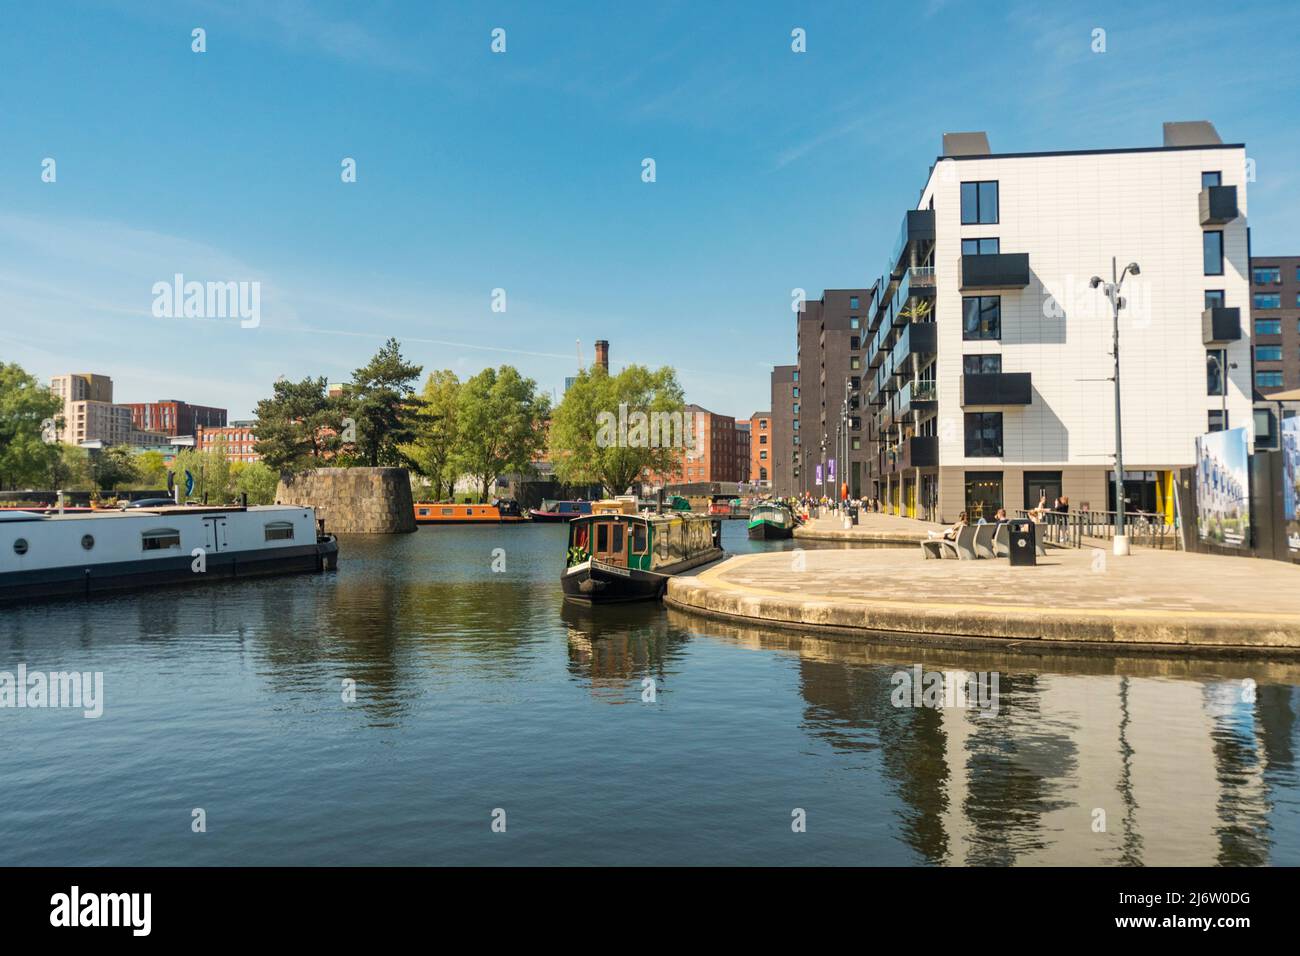 New Islington, a regenerated area of Manchester previously associated with the mills from the cotton industry. Stock Photo